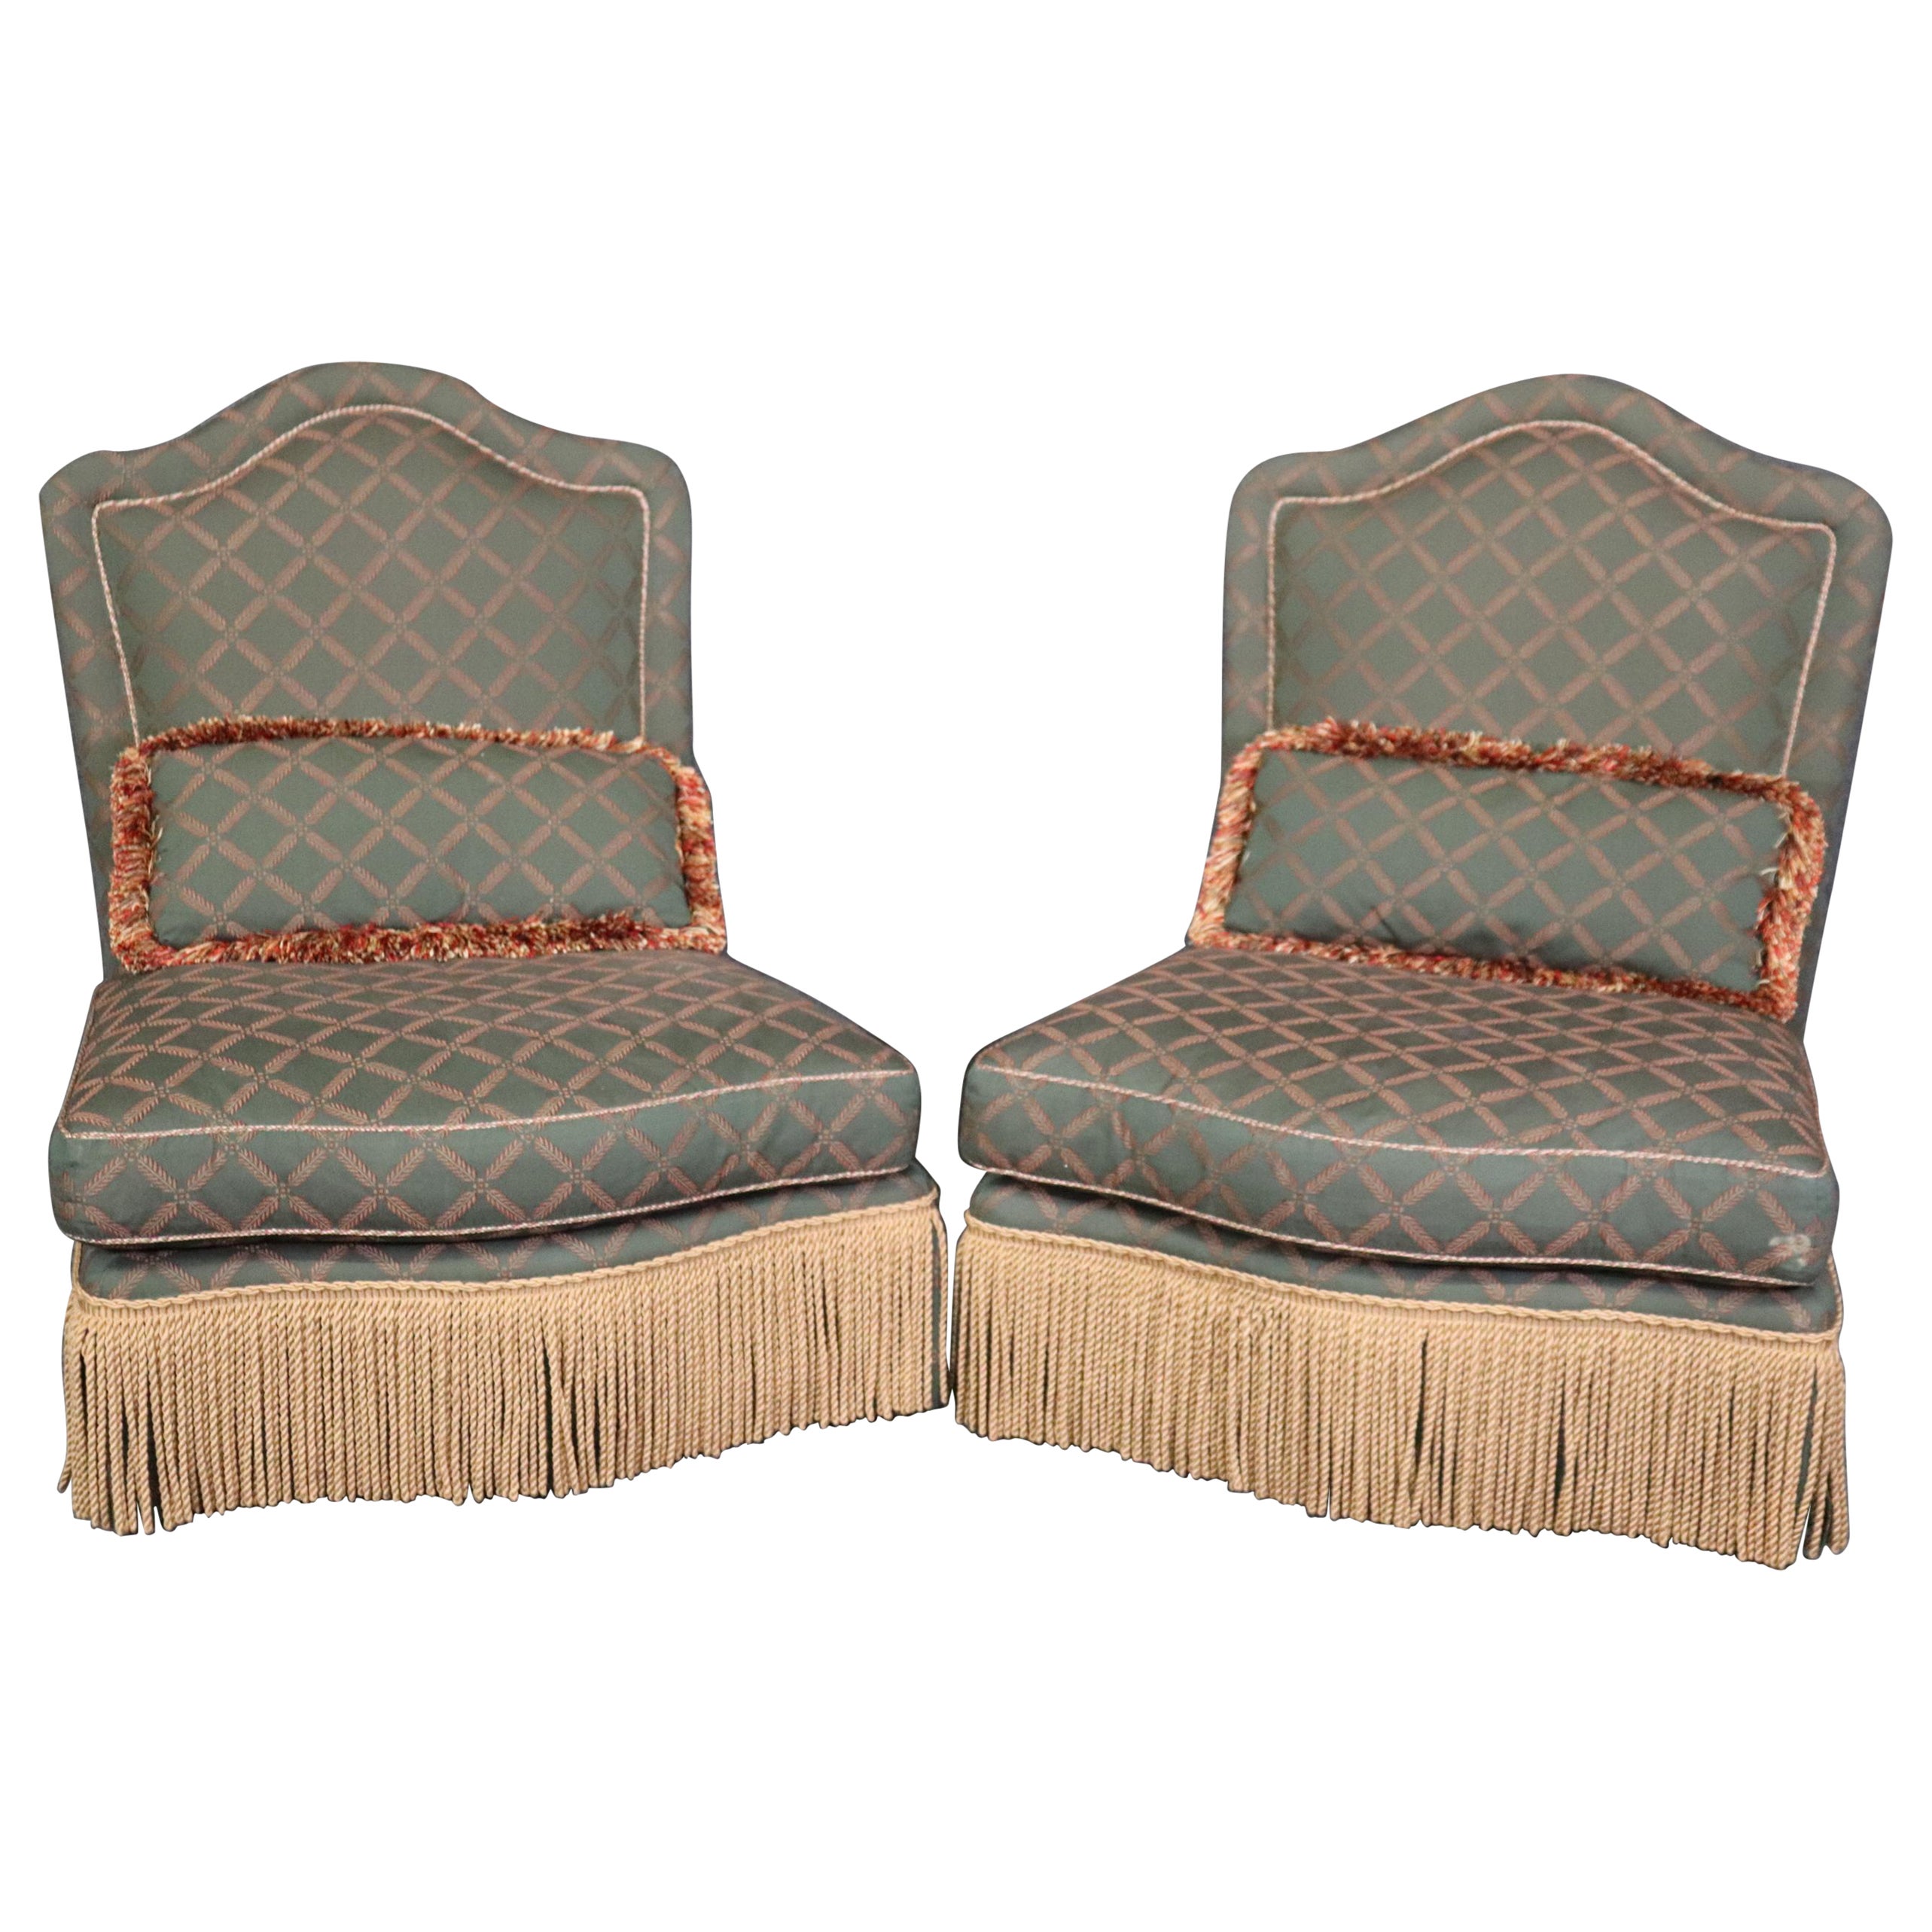 Pair of Baker Furniture Company Armless Bergere or Boudoir Chairs